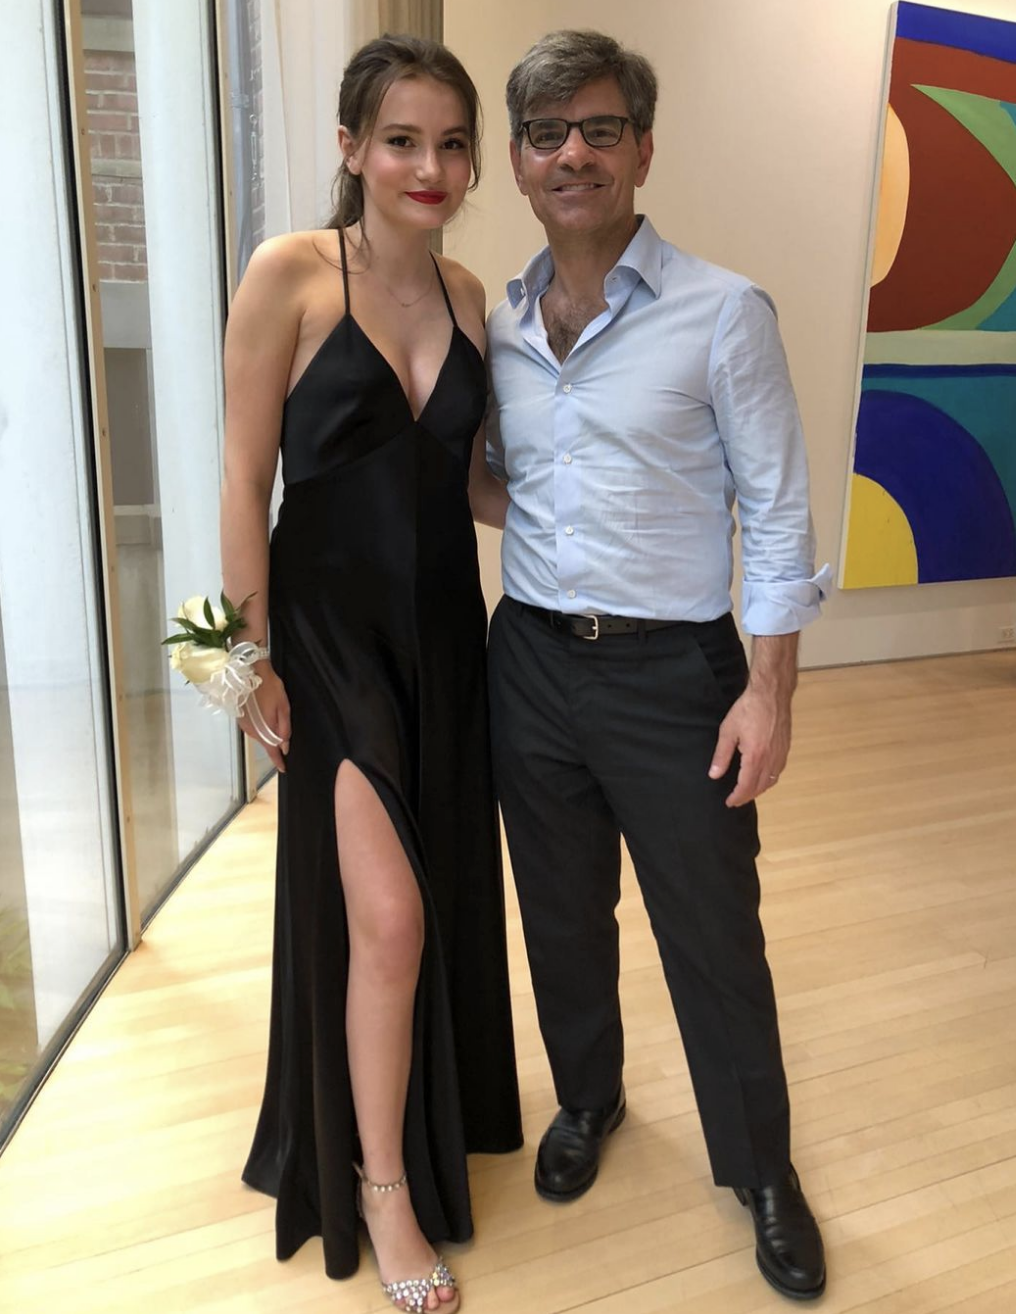 <p><span>In June 2021, Ali Wentworth shared this </span><a href="https://www.instagram.com/p/CPomGgyrEOX/">Instagram photo</a><span> of eldest daughter Elliott Stephanopoulos (who was born in 2002) posing on prom night with her dad, "Good Morning America" anchor George Stephanopoulos.</span></p>